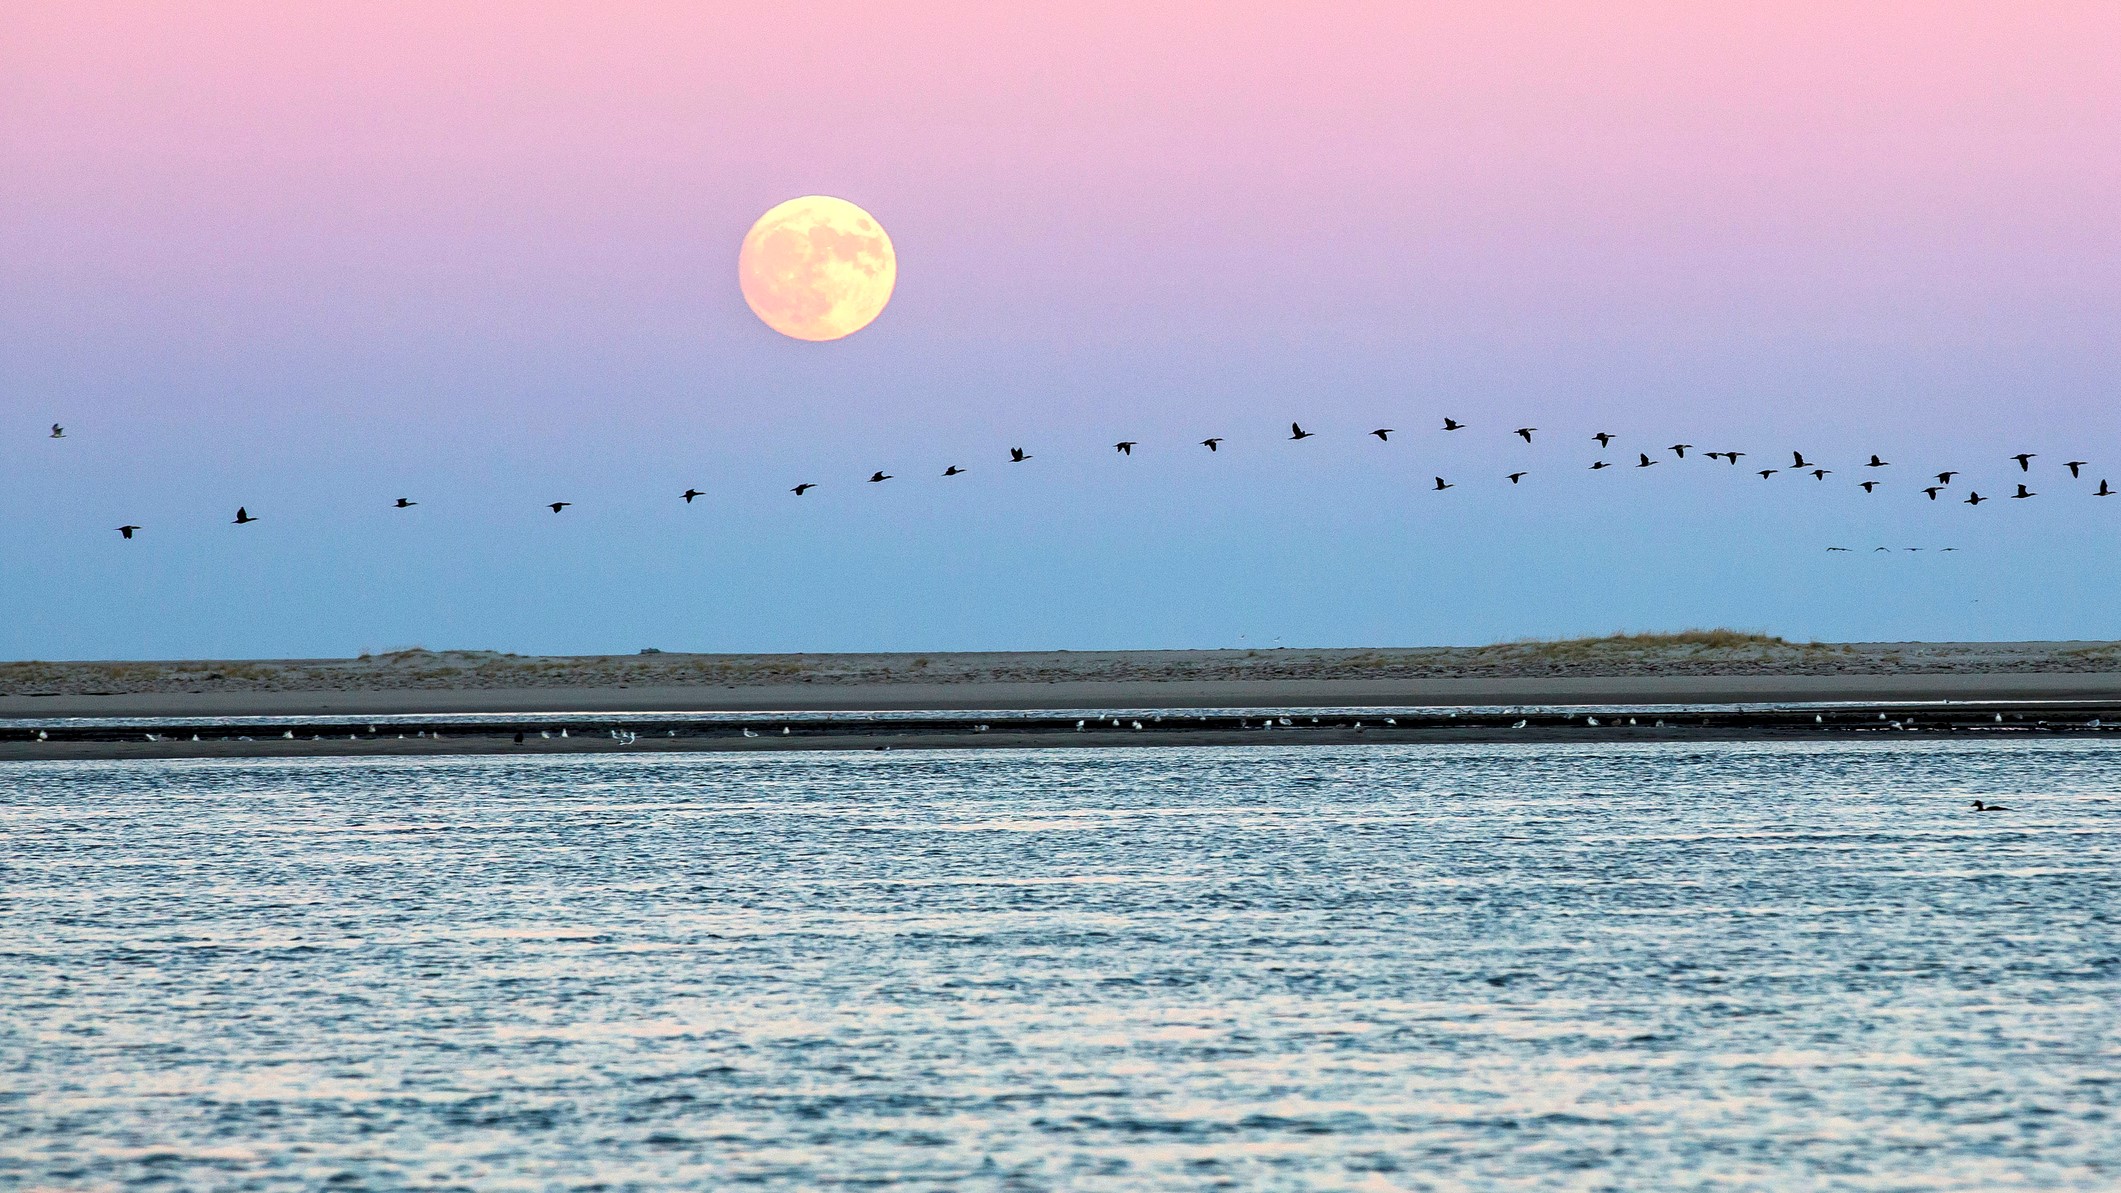 Large supermoon in hazy blue pink sky with a line of migratory birds flying across the sky.